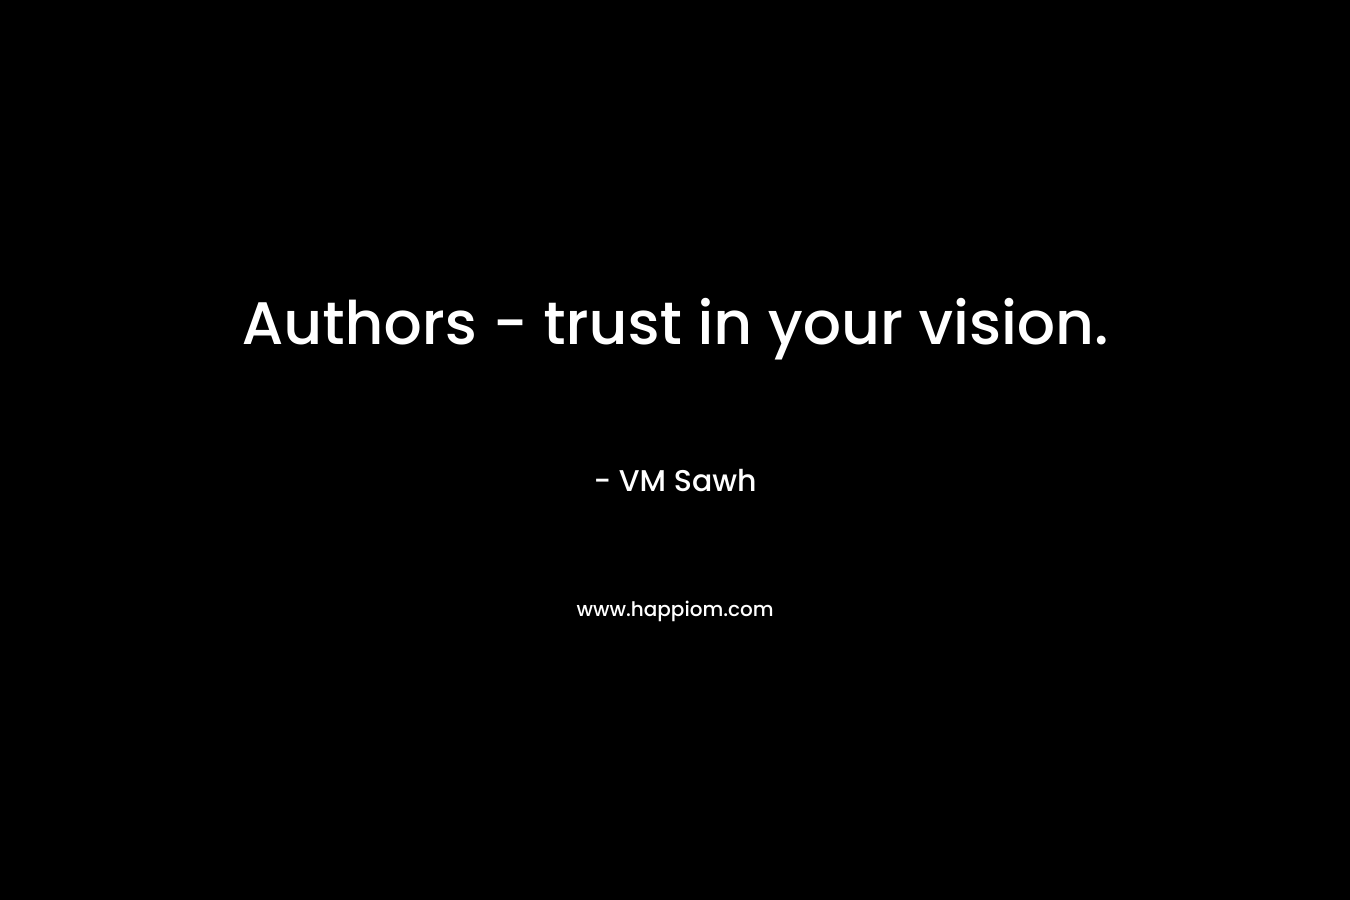 Authors – trust in your vision. – VM Sawh